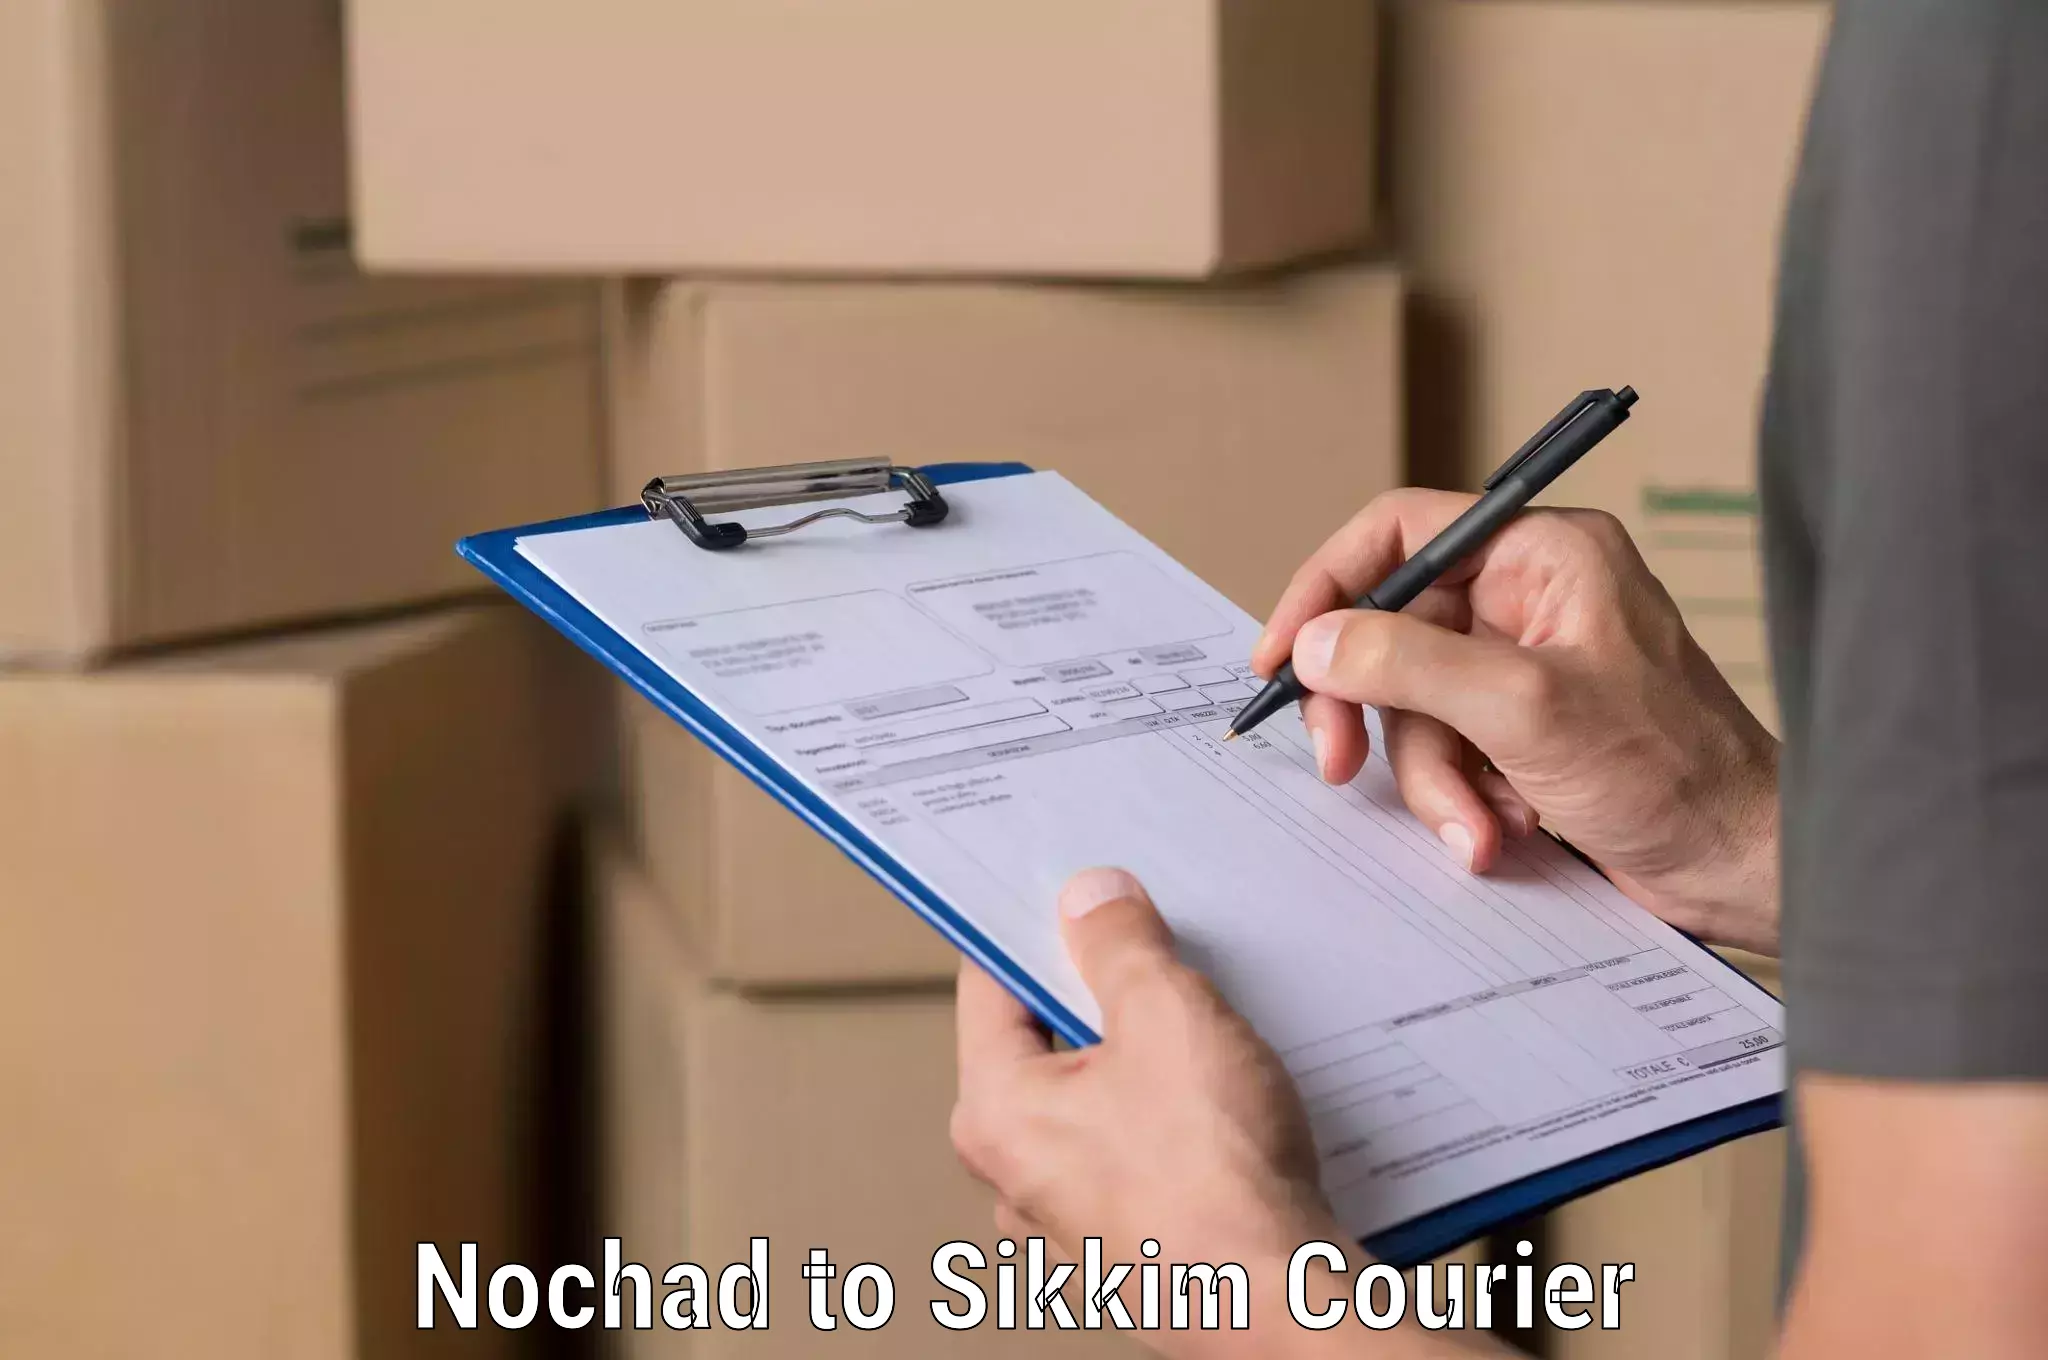 Supply chain efficiency Nochad to Pelling